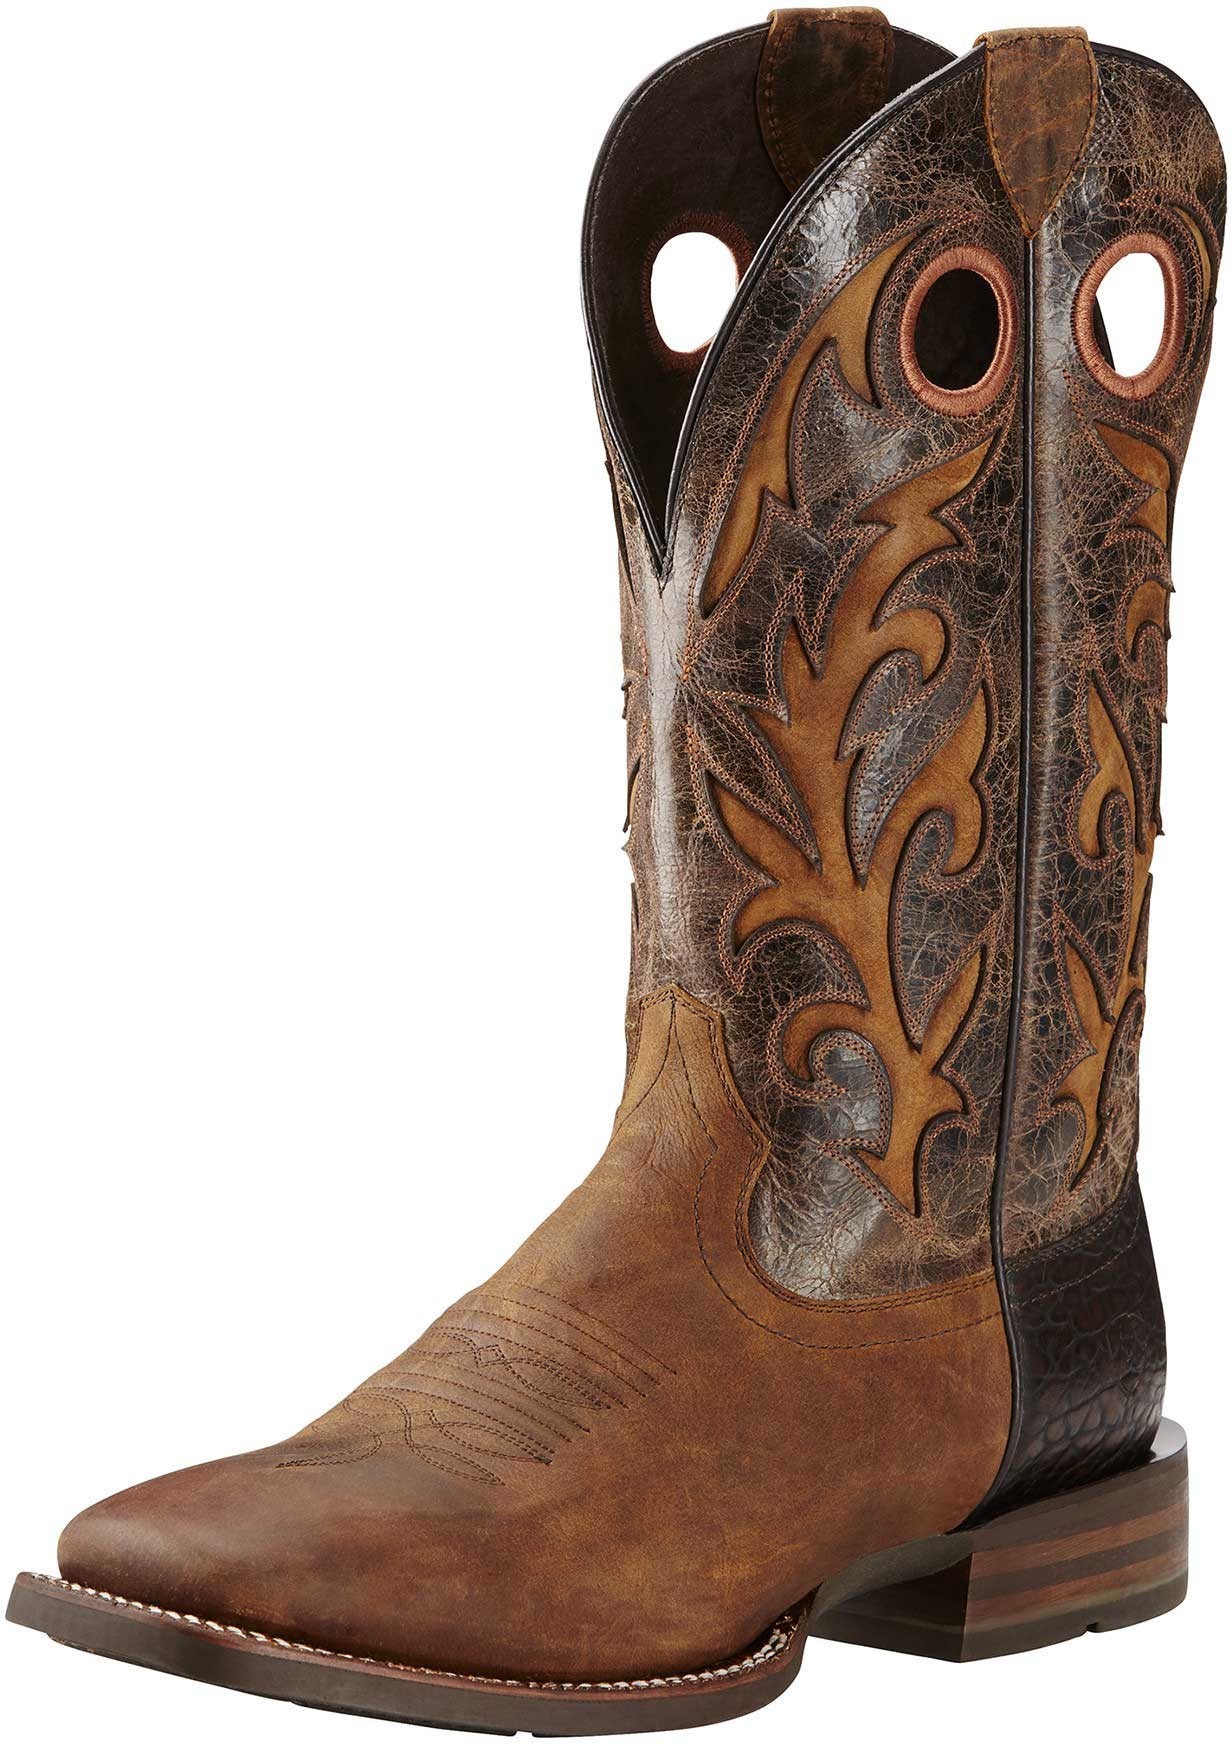 Ariat Men's Boots 'Barstow' Square Toe 